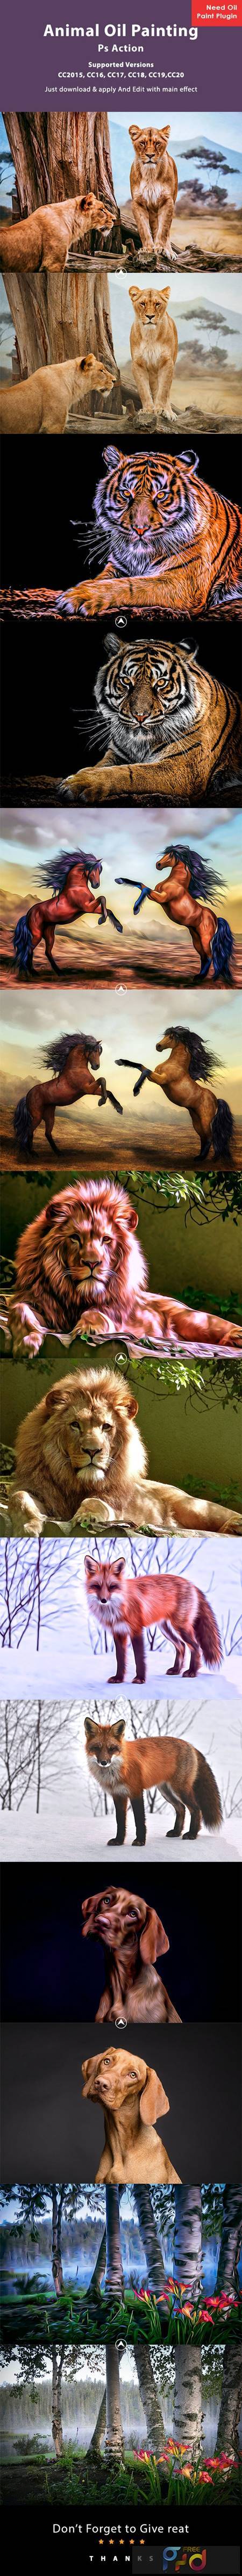 Animal Oil Painting Photoshop Action 26608753 1